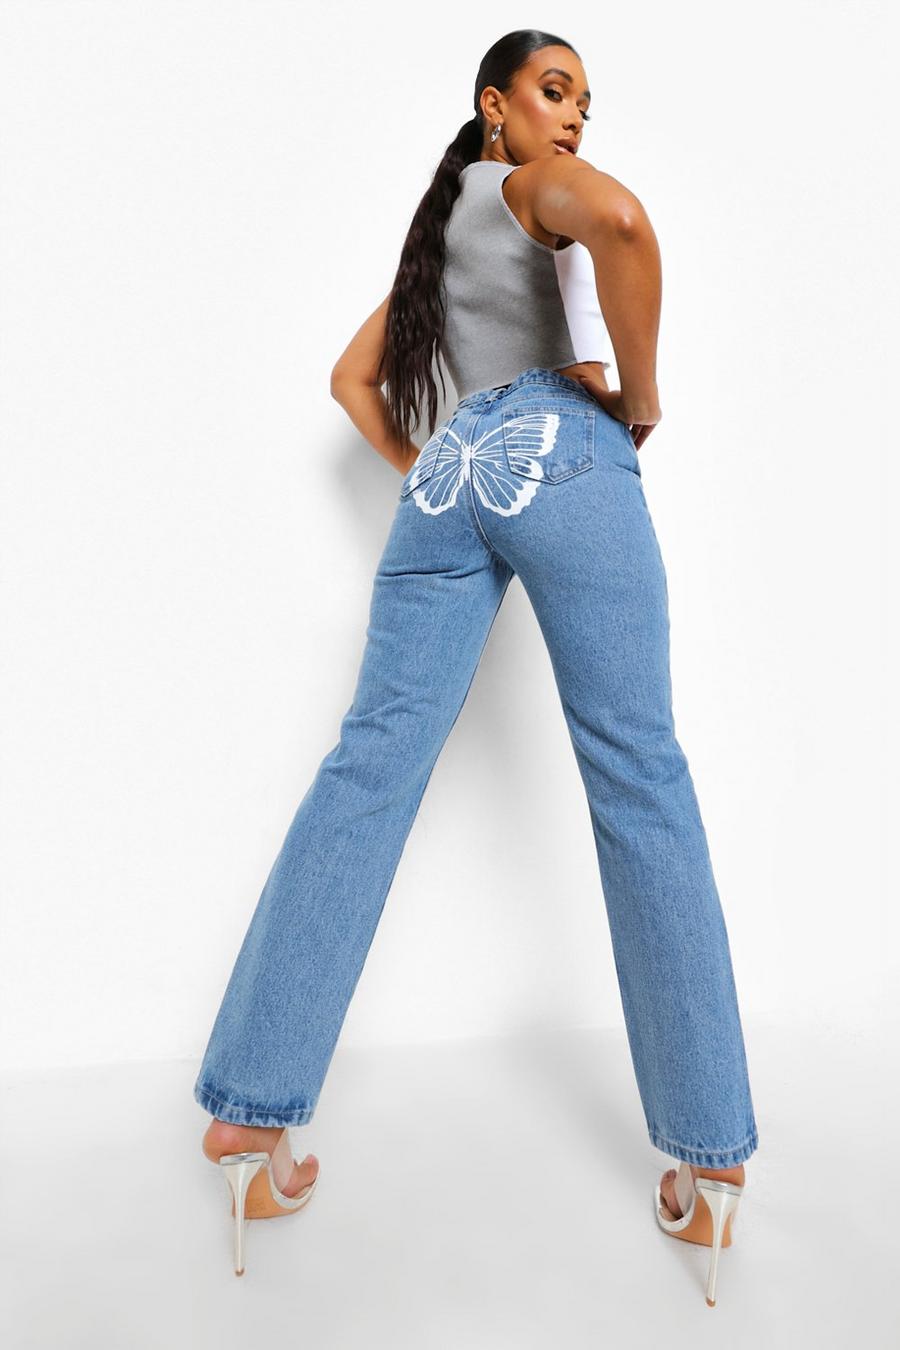 High Waisted Butterfly Print Straight Jeans - Blue L